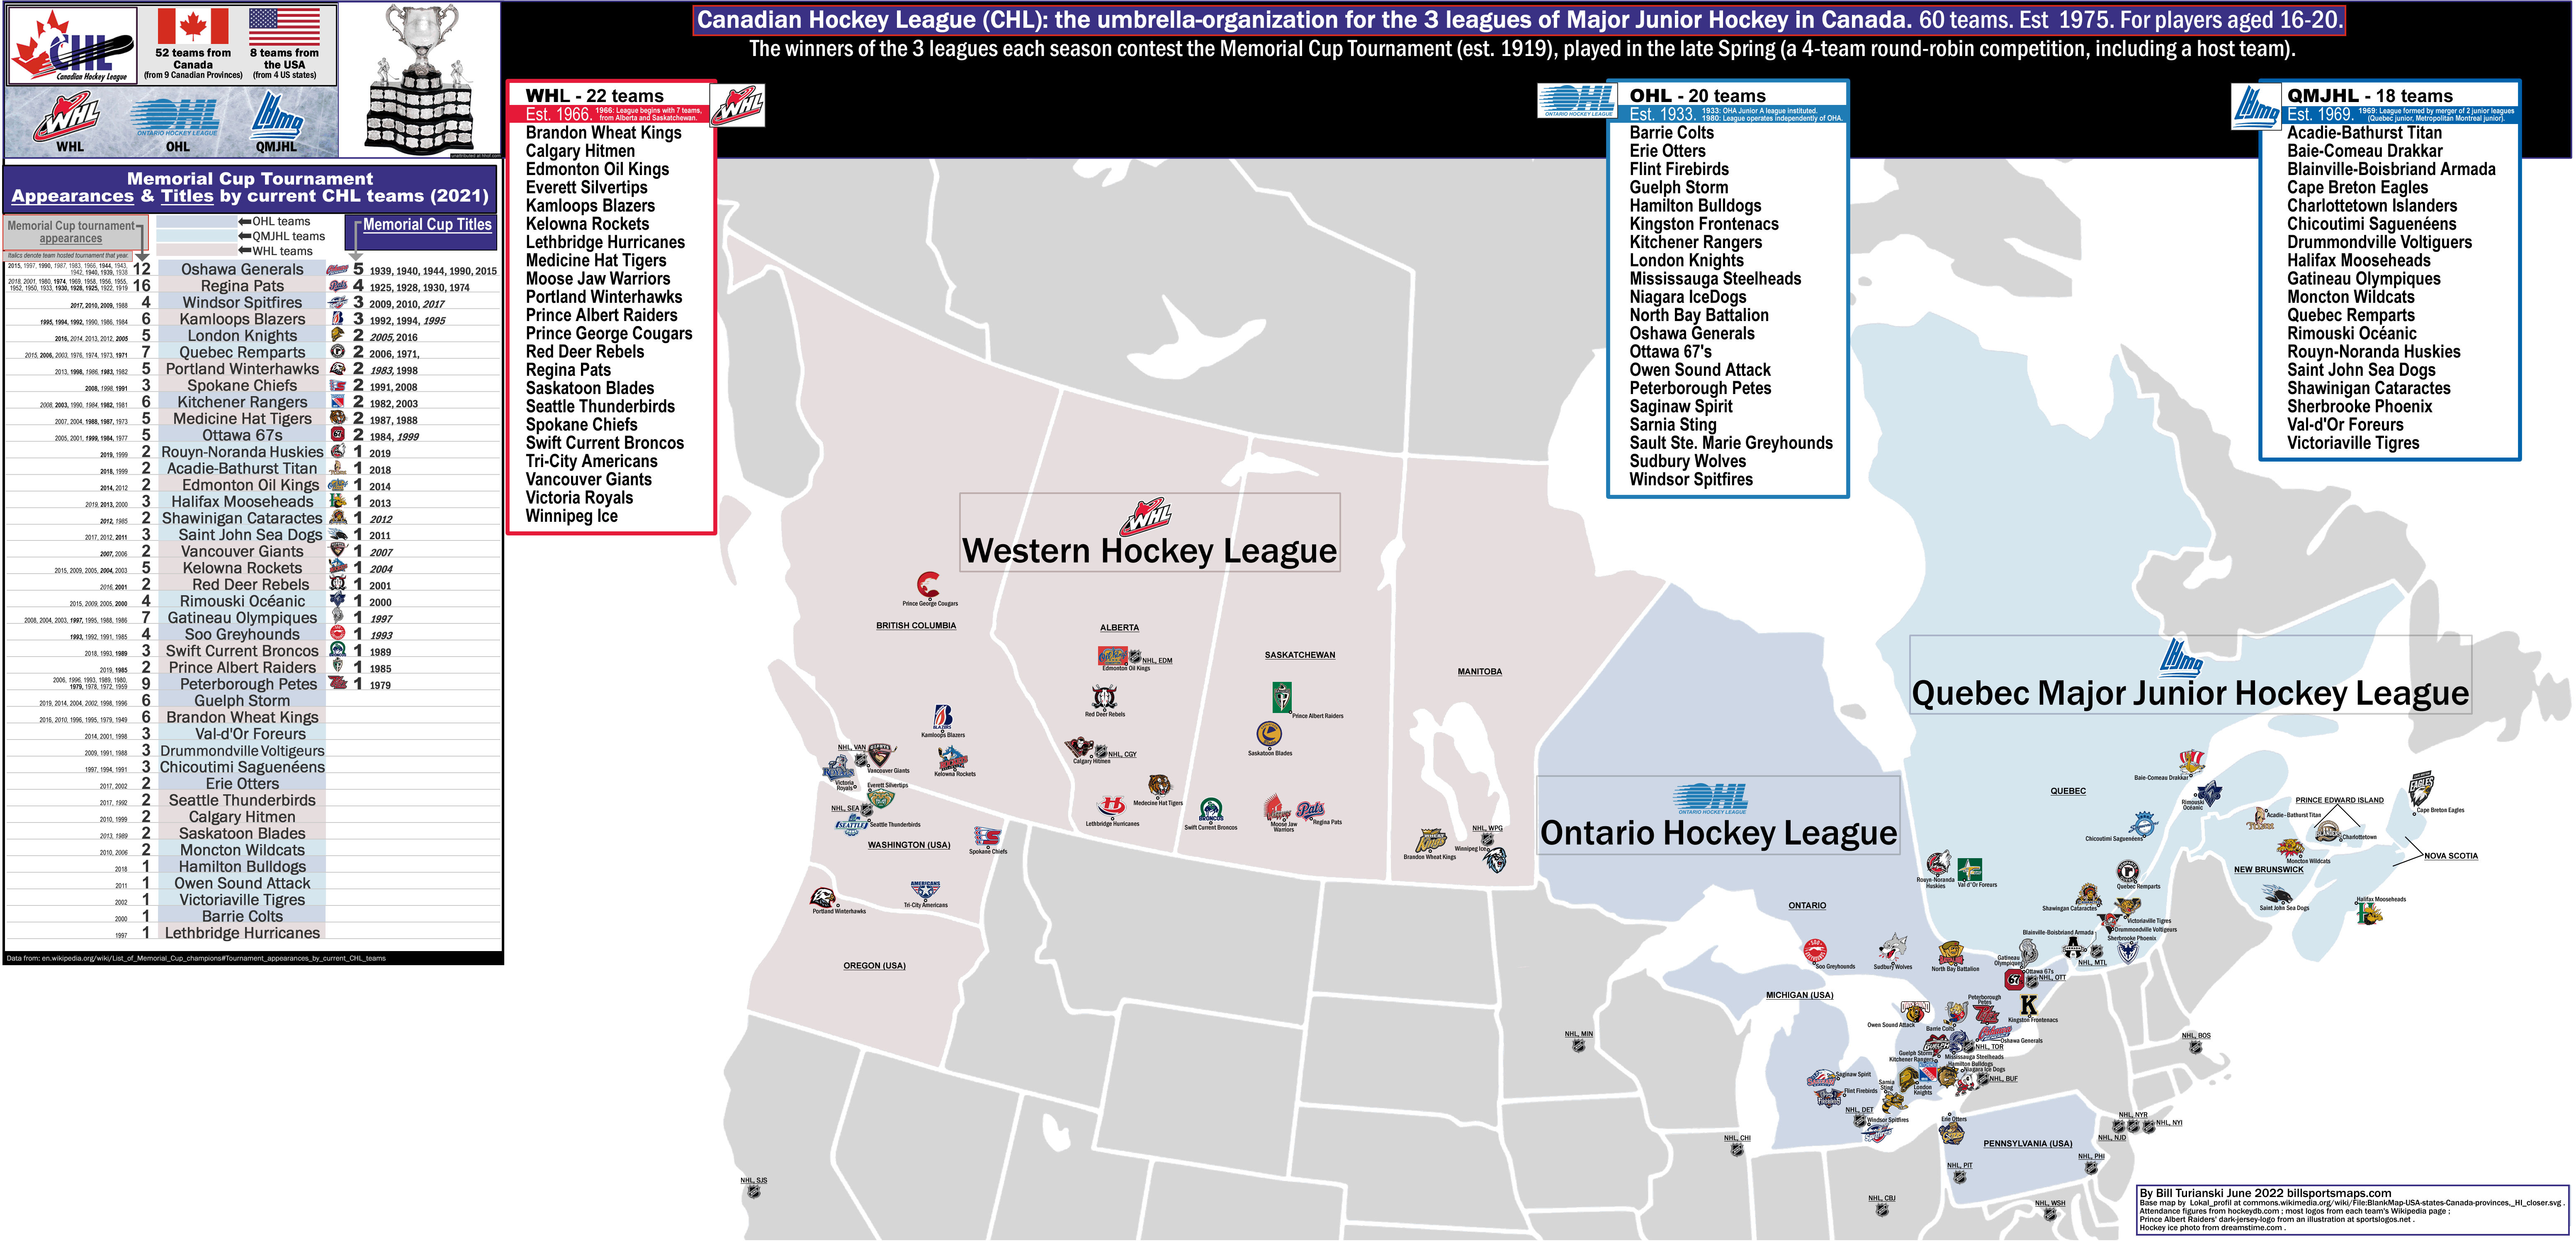 File:American Hockey League 2011-12 map zoomed.svg - Wikipedia